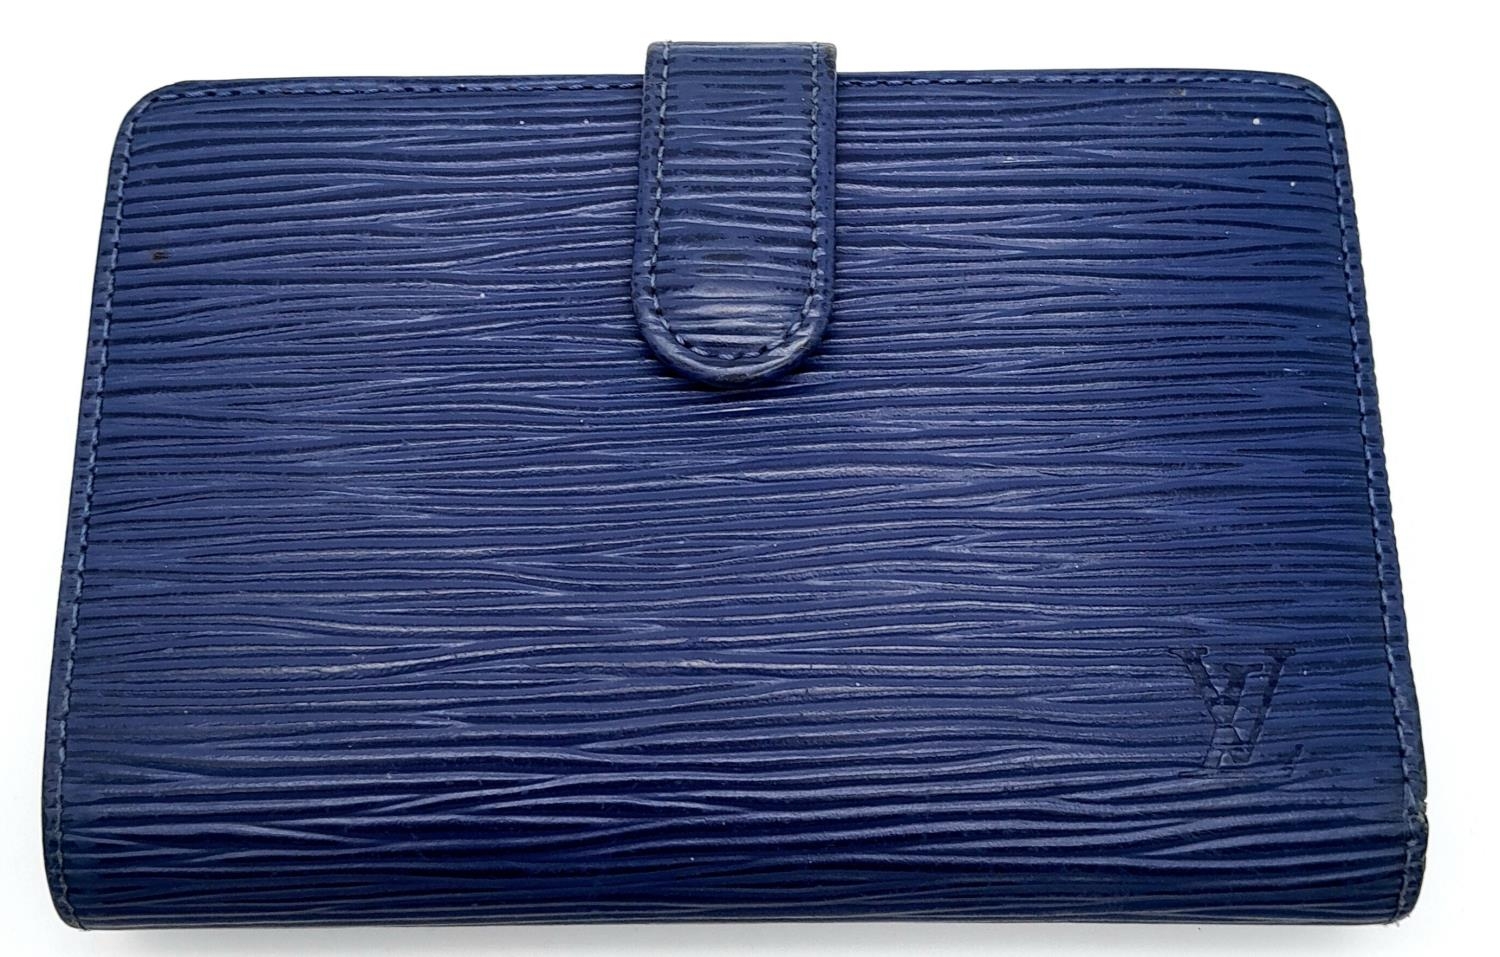 A Vintage Louis Vuitton Blue Bifold Wallet. Epi leather exterior with silver-toned hardware and - Image 2 of 17